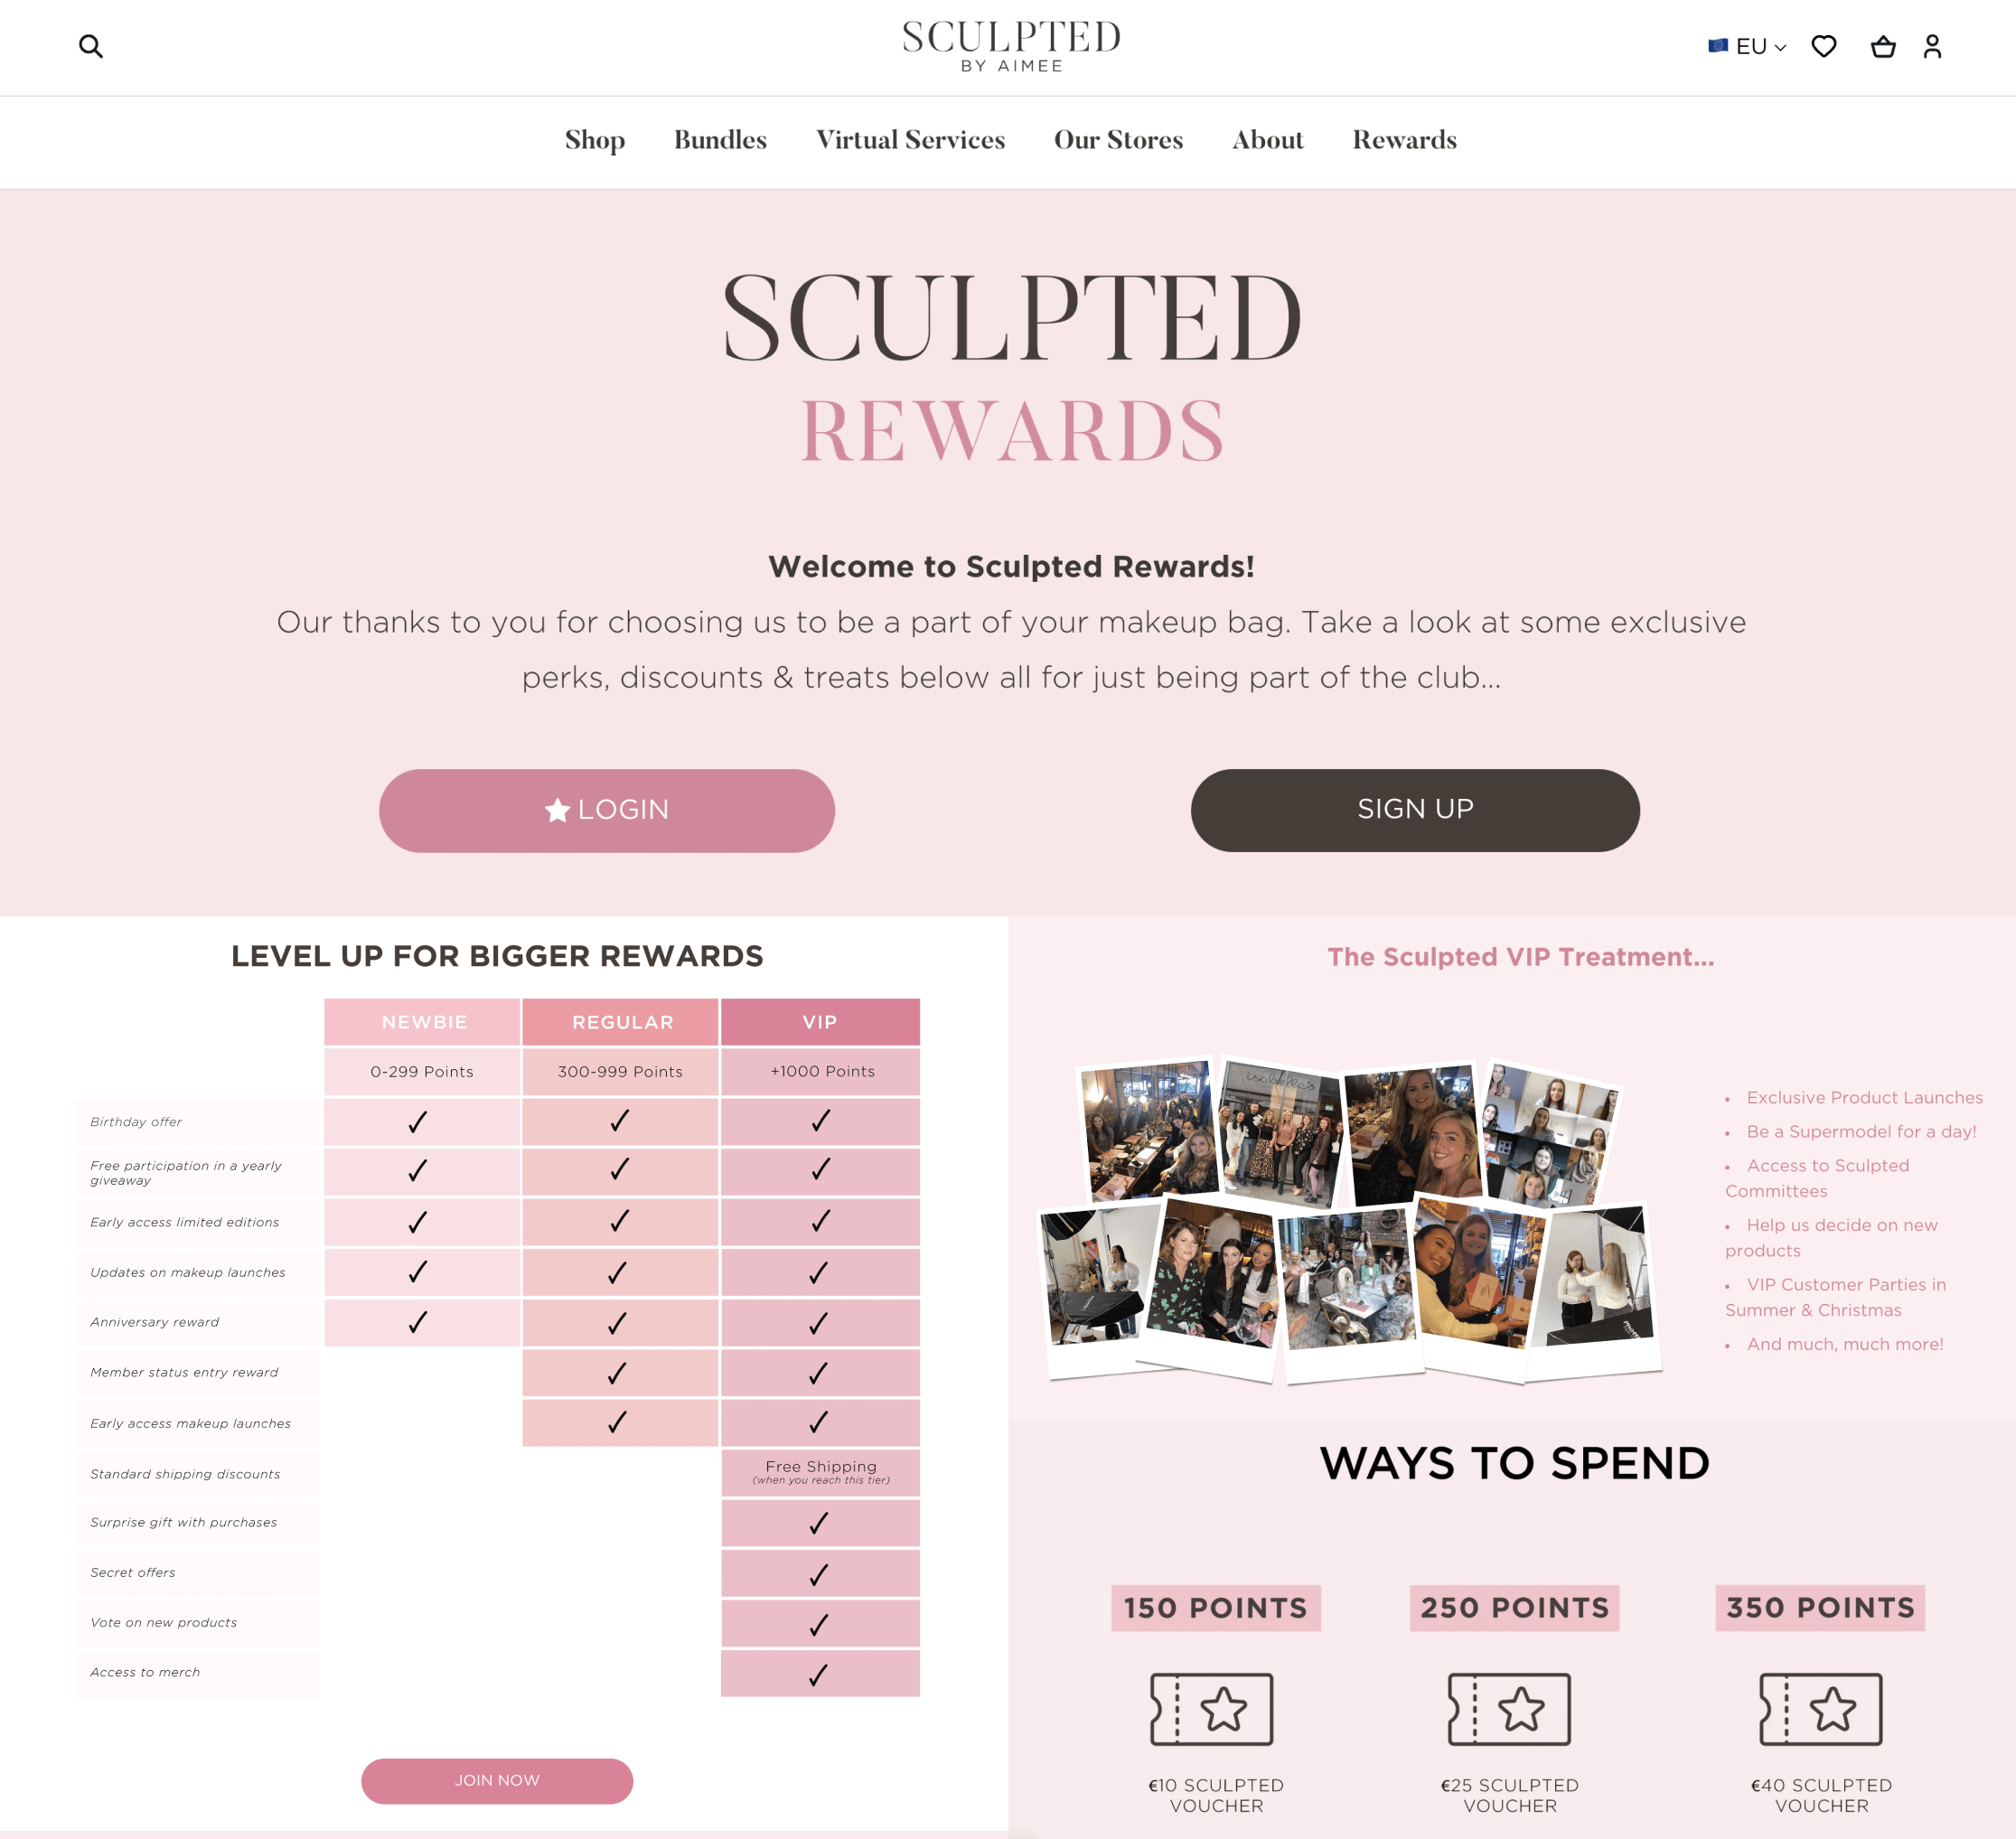 A screenshot of Sculpted by Aimee’s rewards program explainer page, highlighting different features of the program including its tiered-VIP rewards program, experiential rewards, and the ways to spend points. 